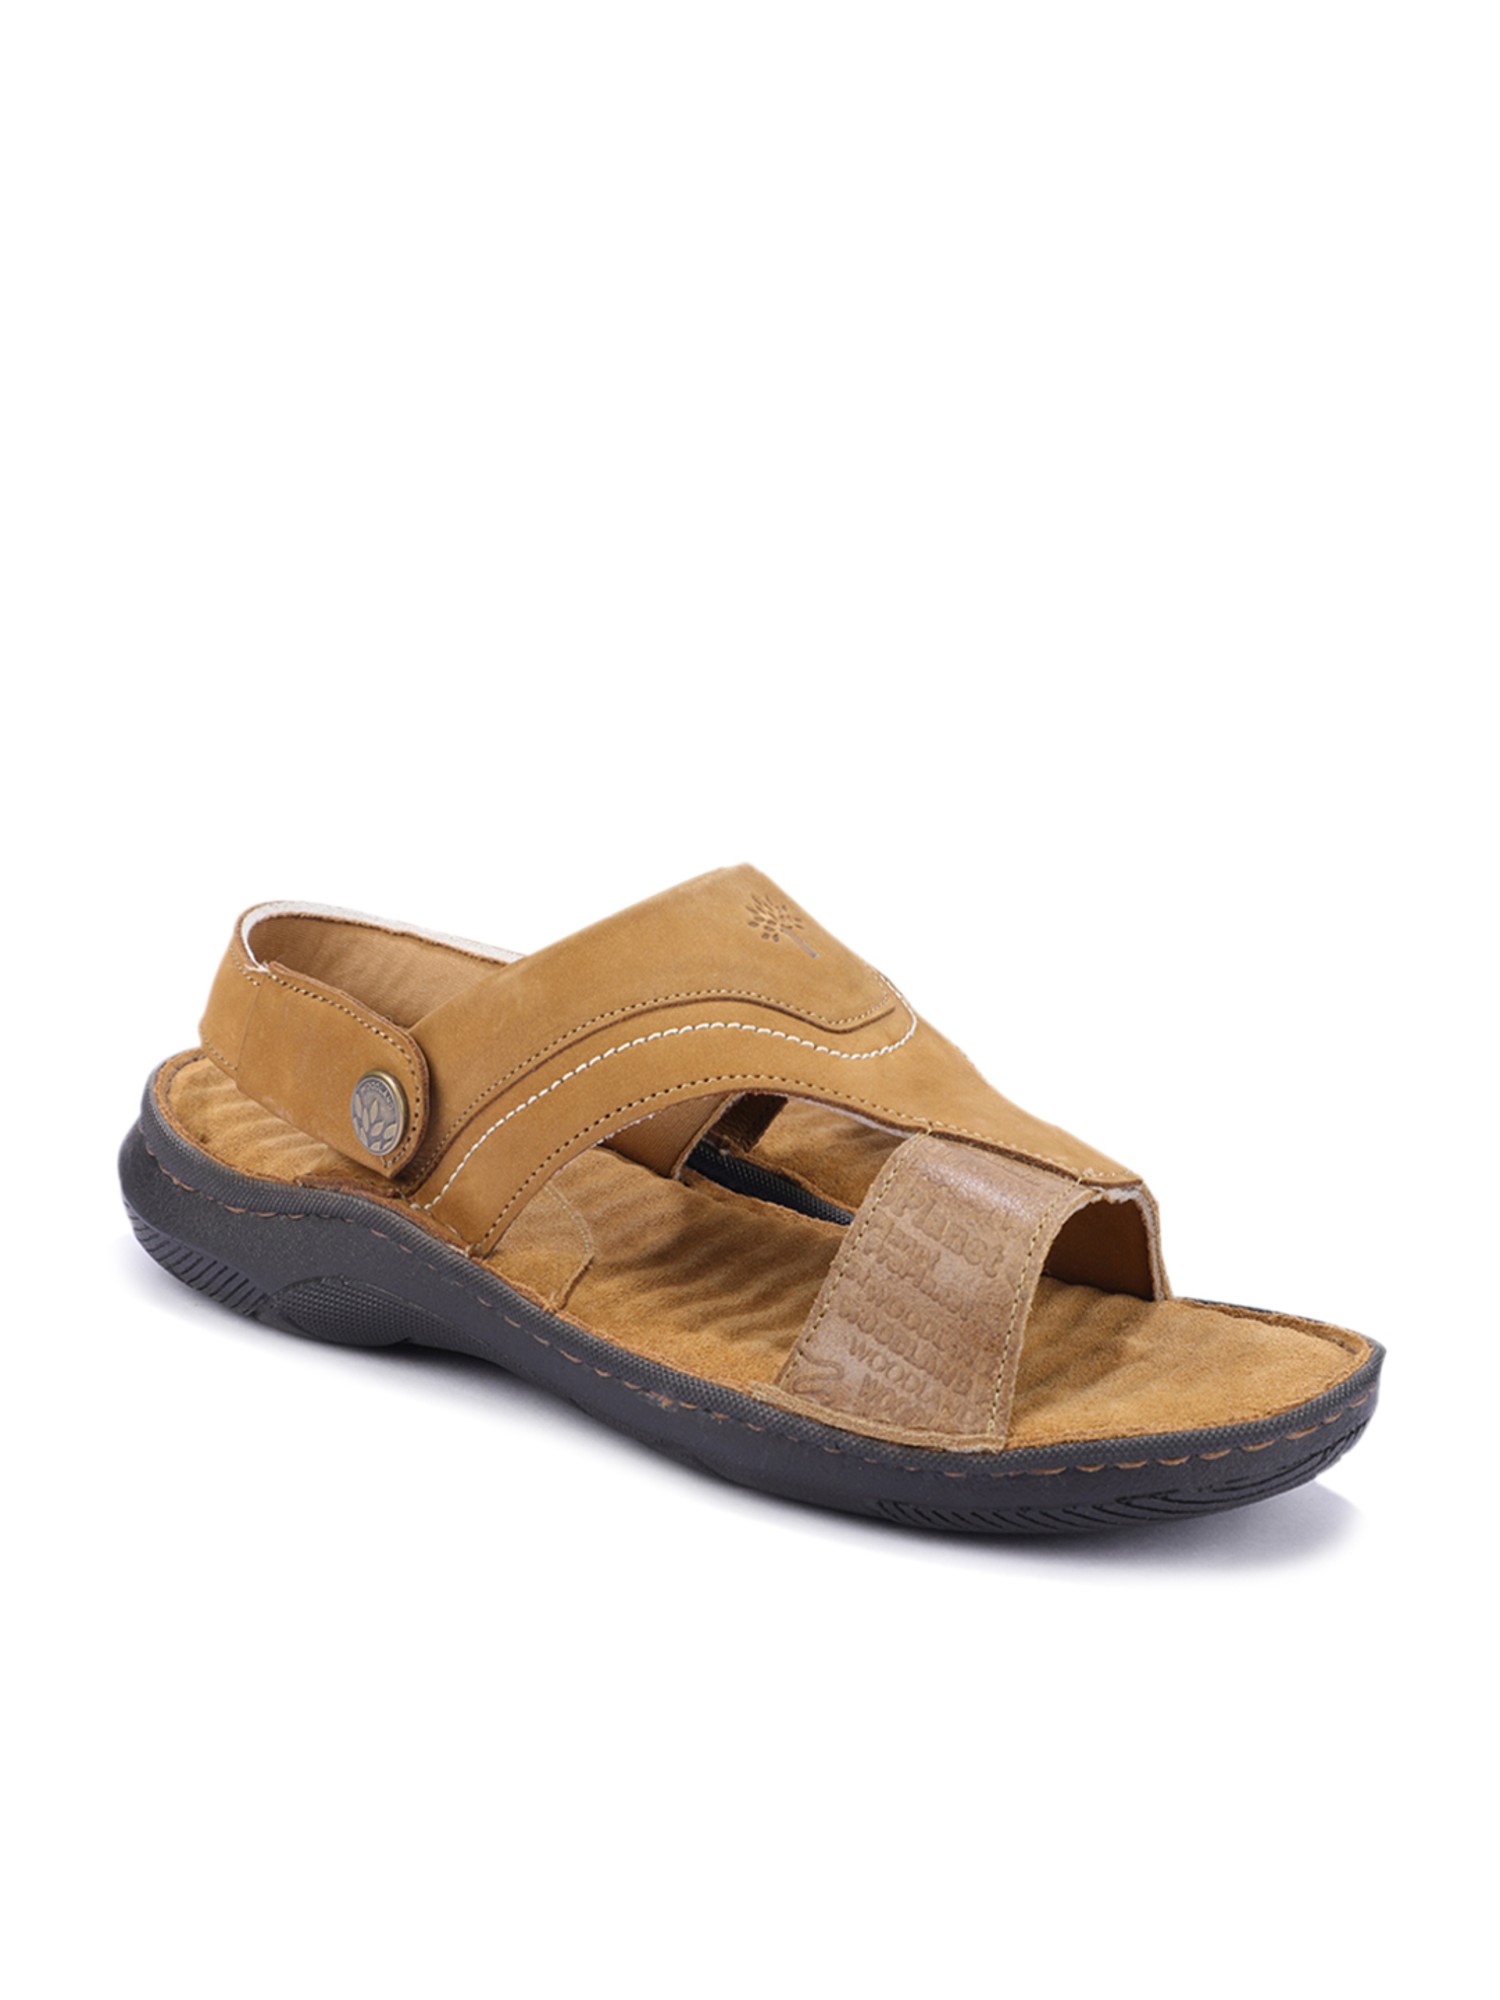 Woodland Tan Sling Back Sandals from 